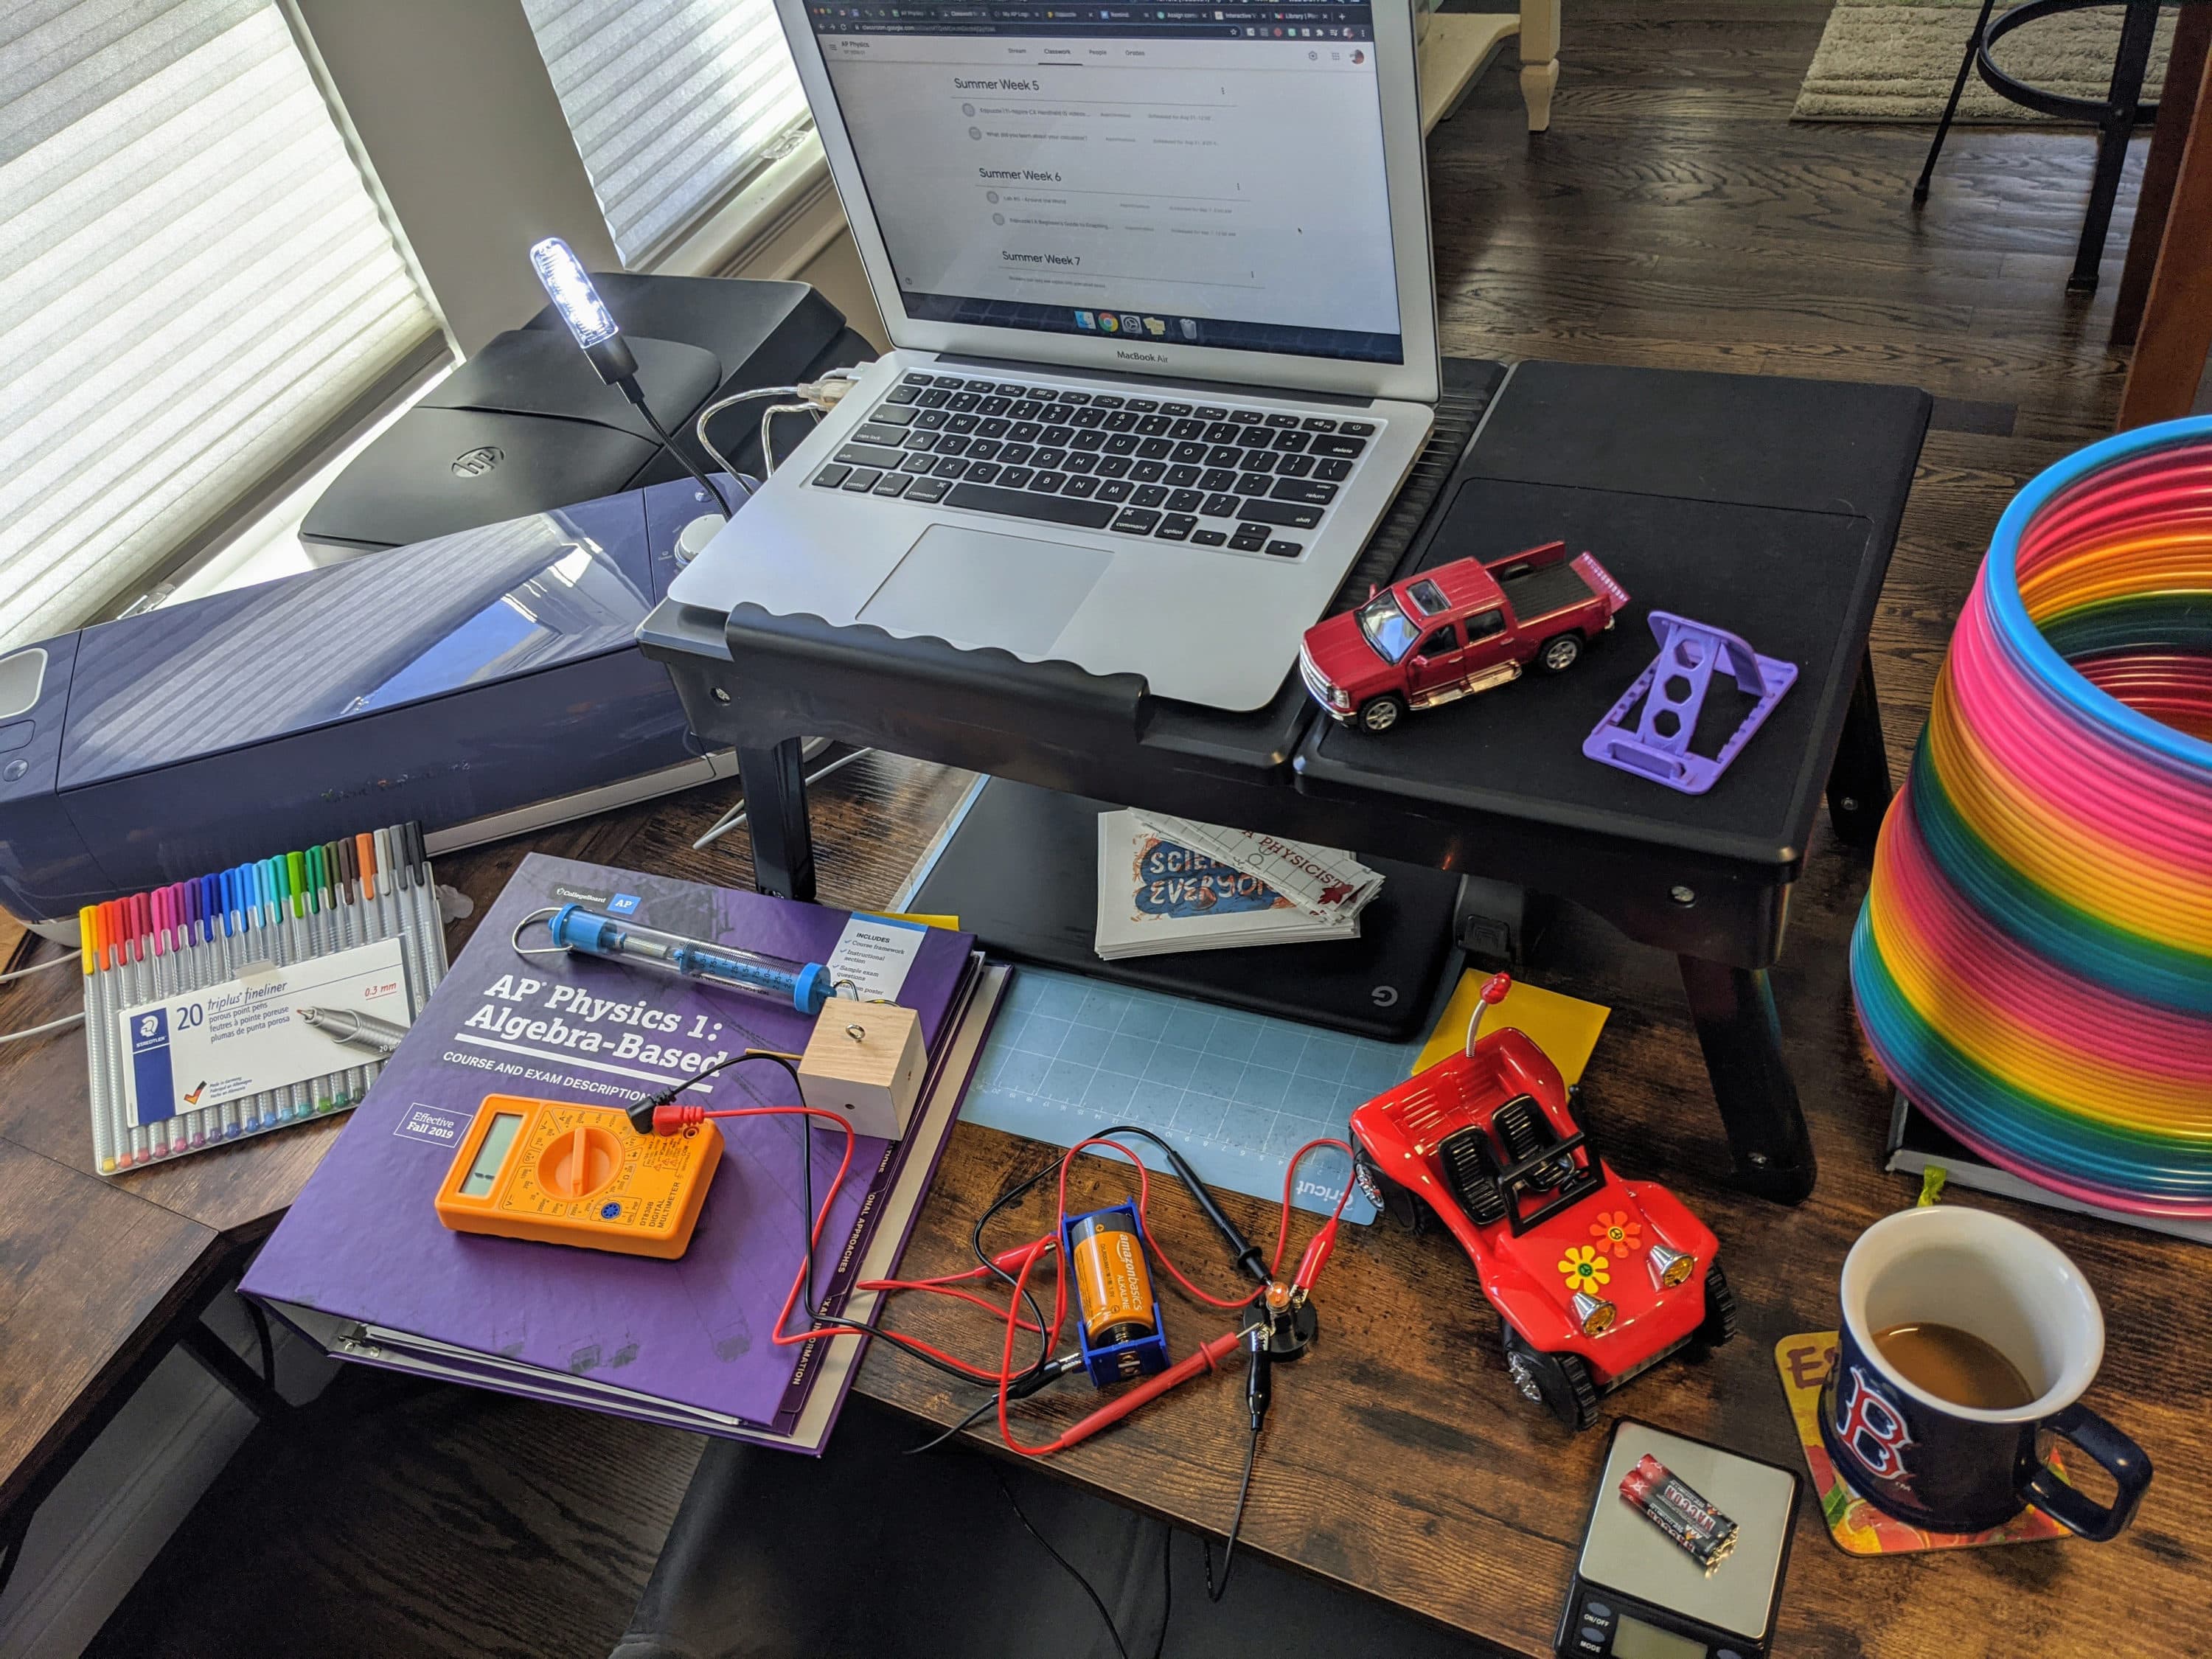 A laptop, various remote-control cars and other physics-friendly objects on a desk.